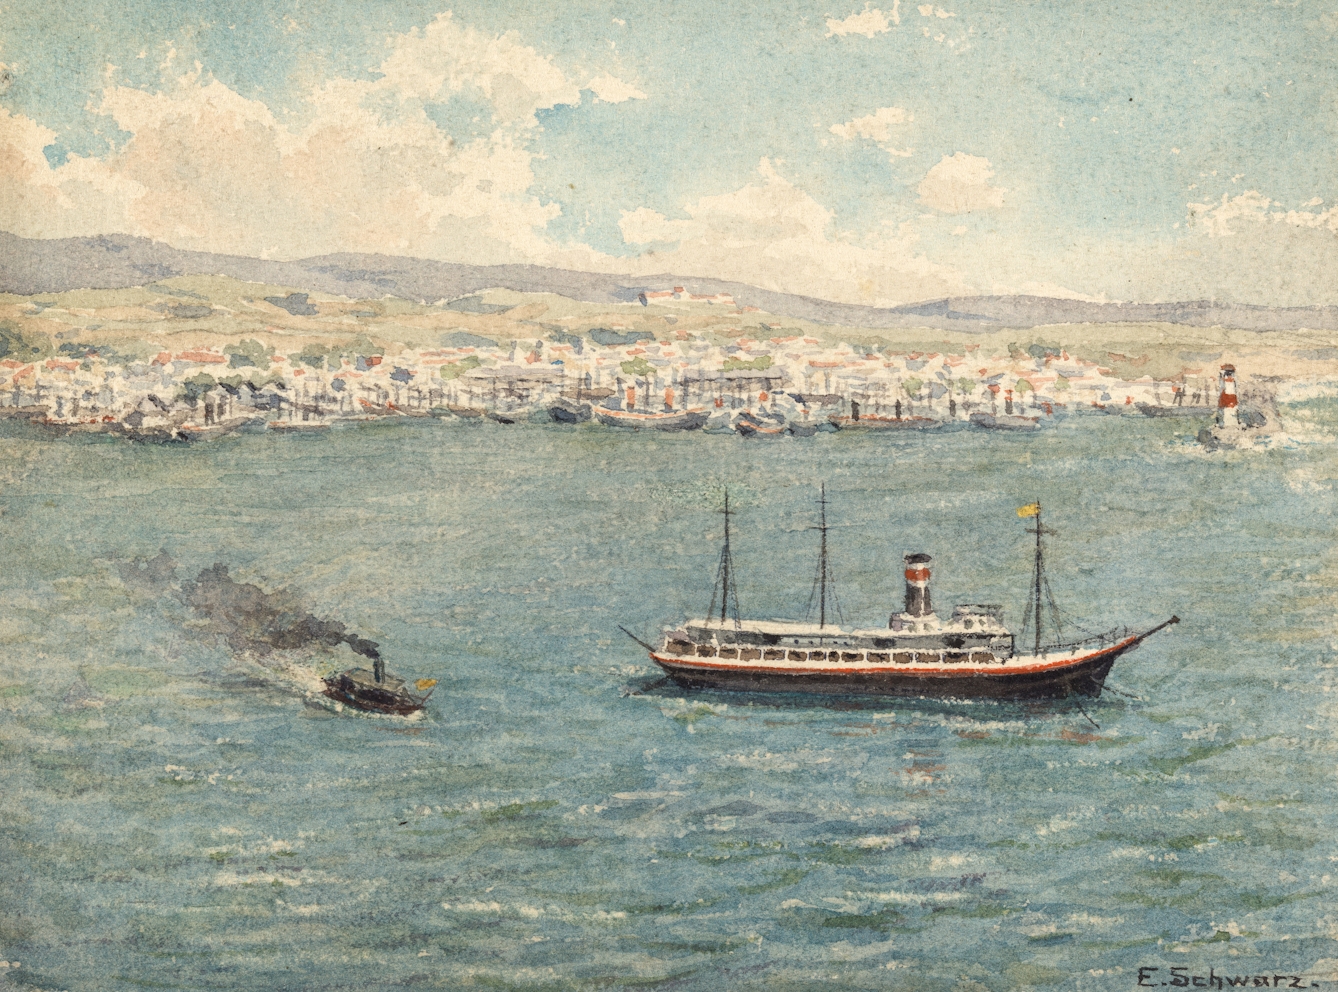 Photograph of a watercolour depicting a coastal scene where a yellow quarantine flag raised on a ship anchored at sea some distance from a port, signals yellow fever is onboard.